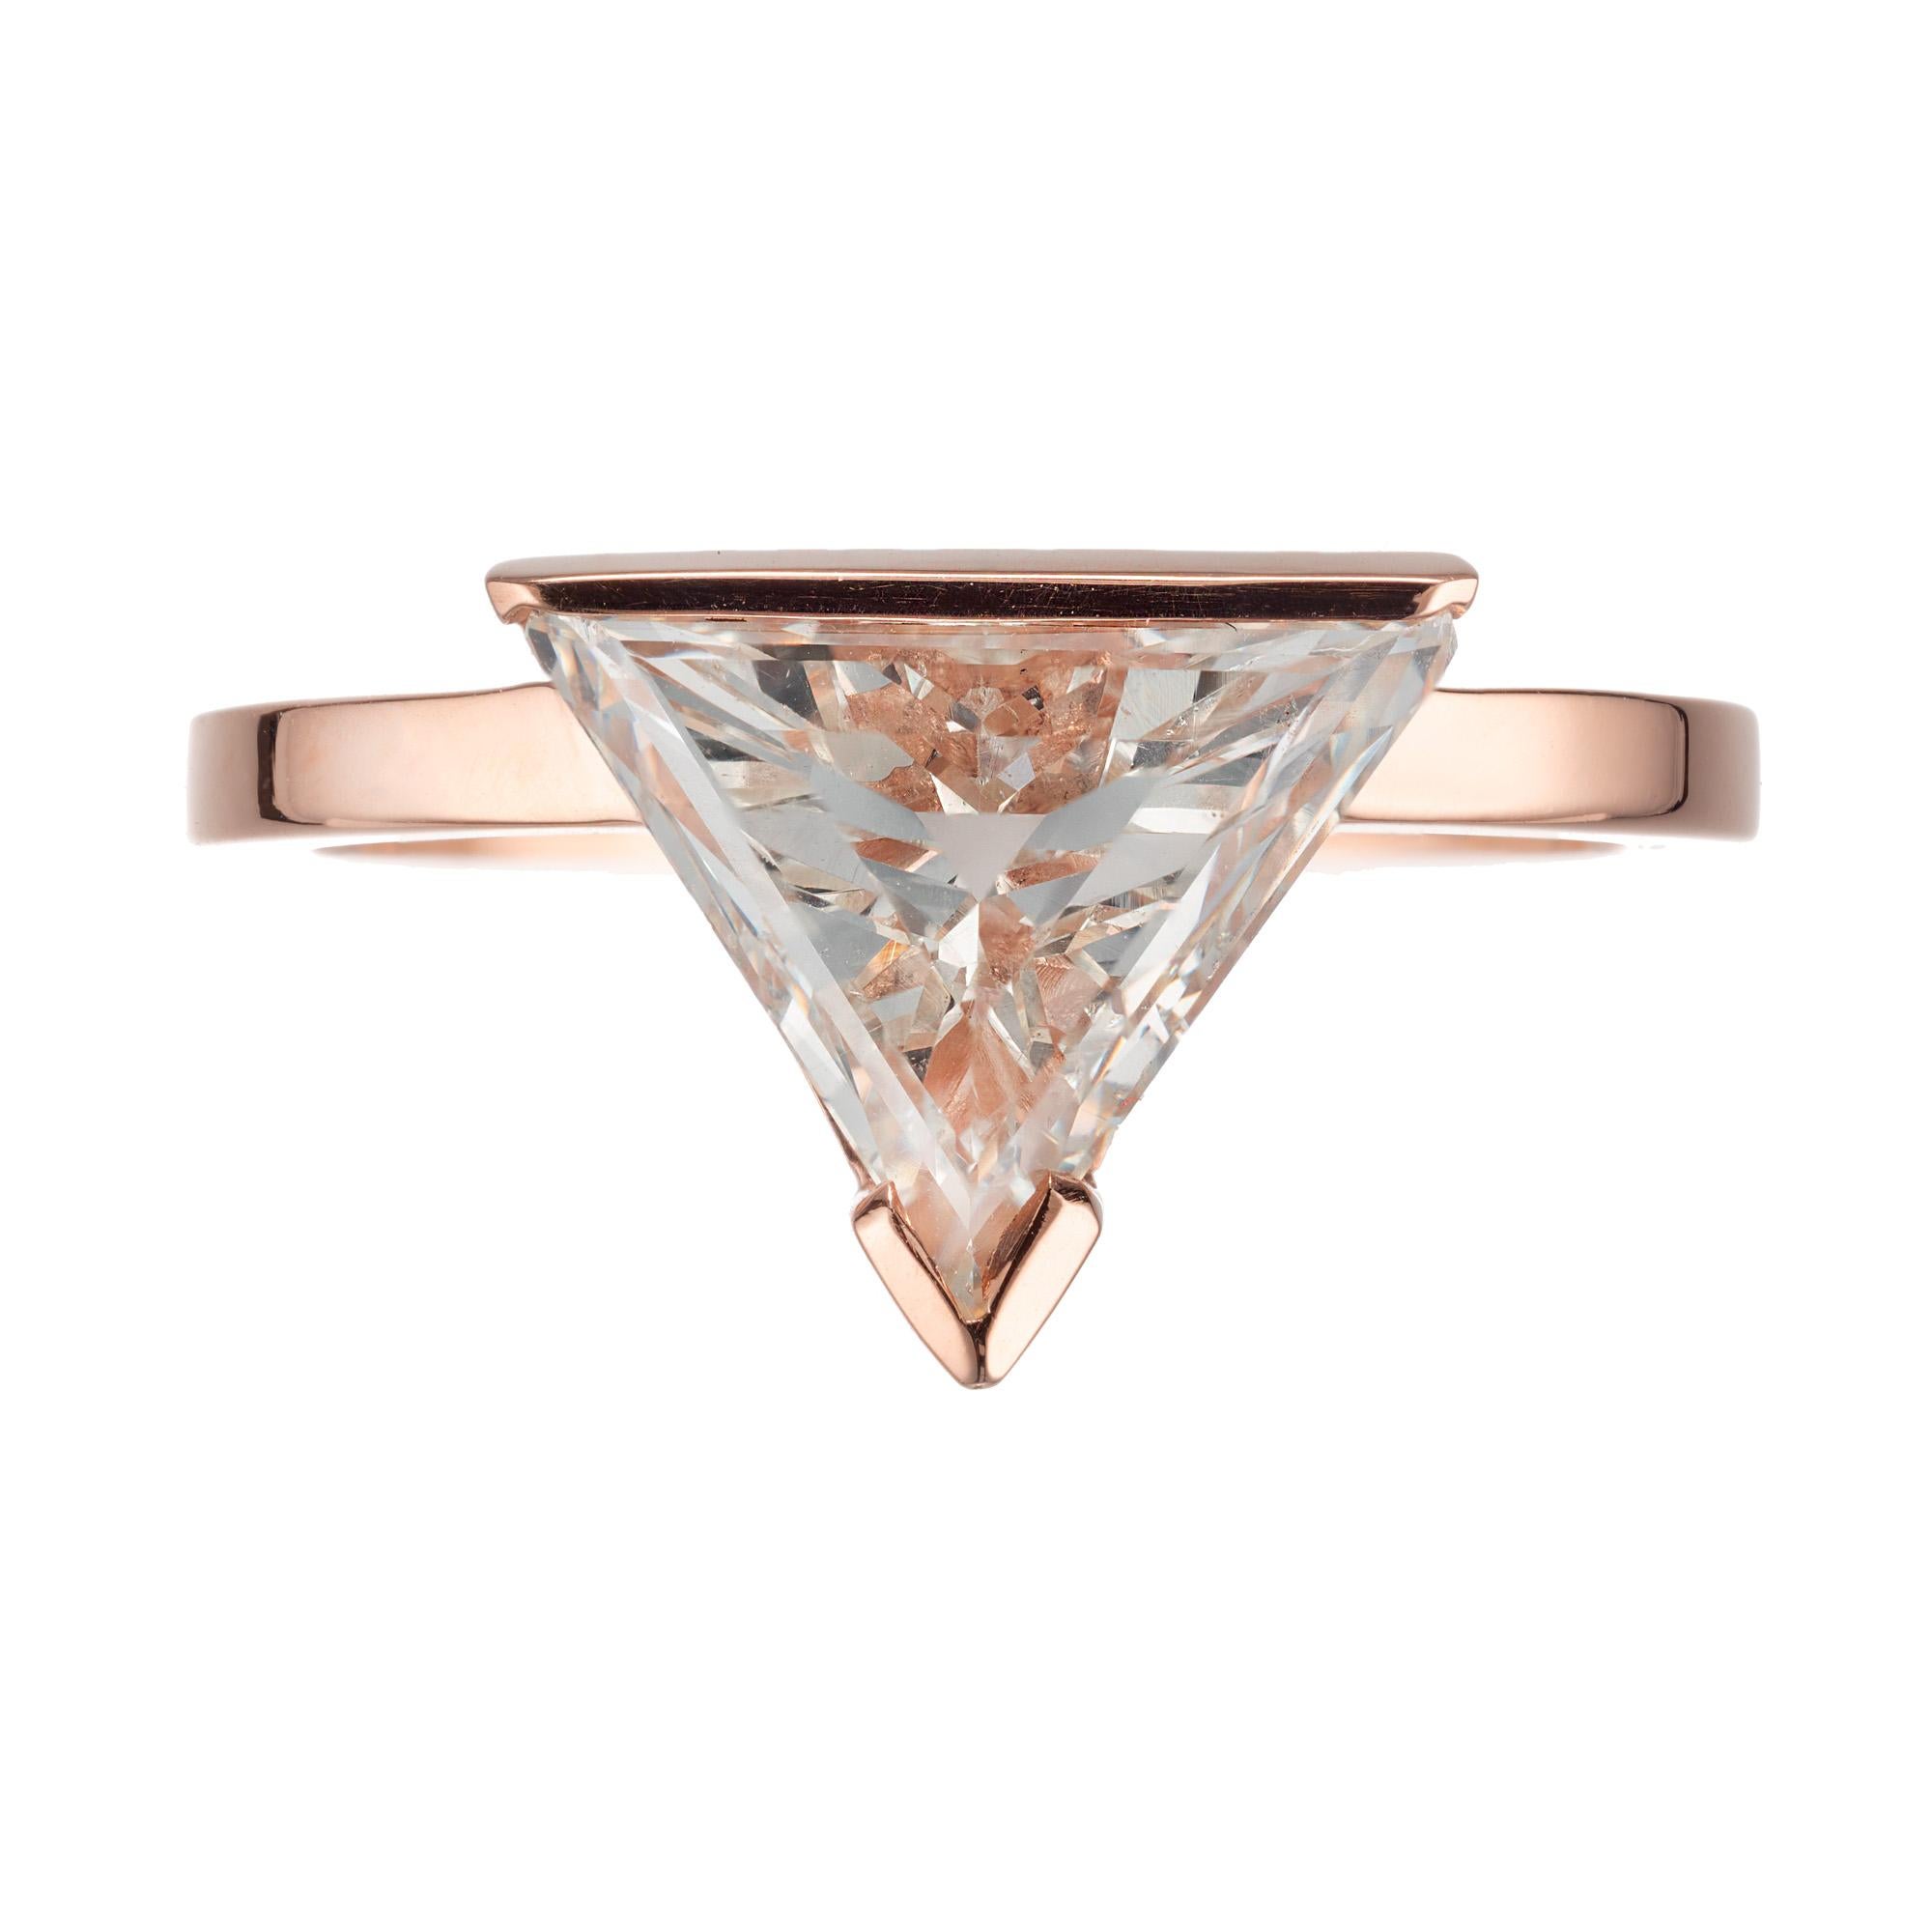 Triangle step cut diamond engagement ring. Extra sparkly step pattern on back facets. GIA Certified.  triangle shape diamonds in a 18k rose gold setting designed in the Peter Suchy Workshop. 

1 triangular step cut L SI diamond, Approximate 2.12